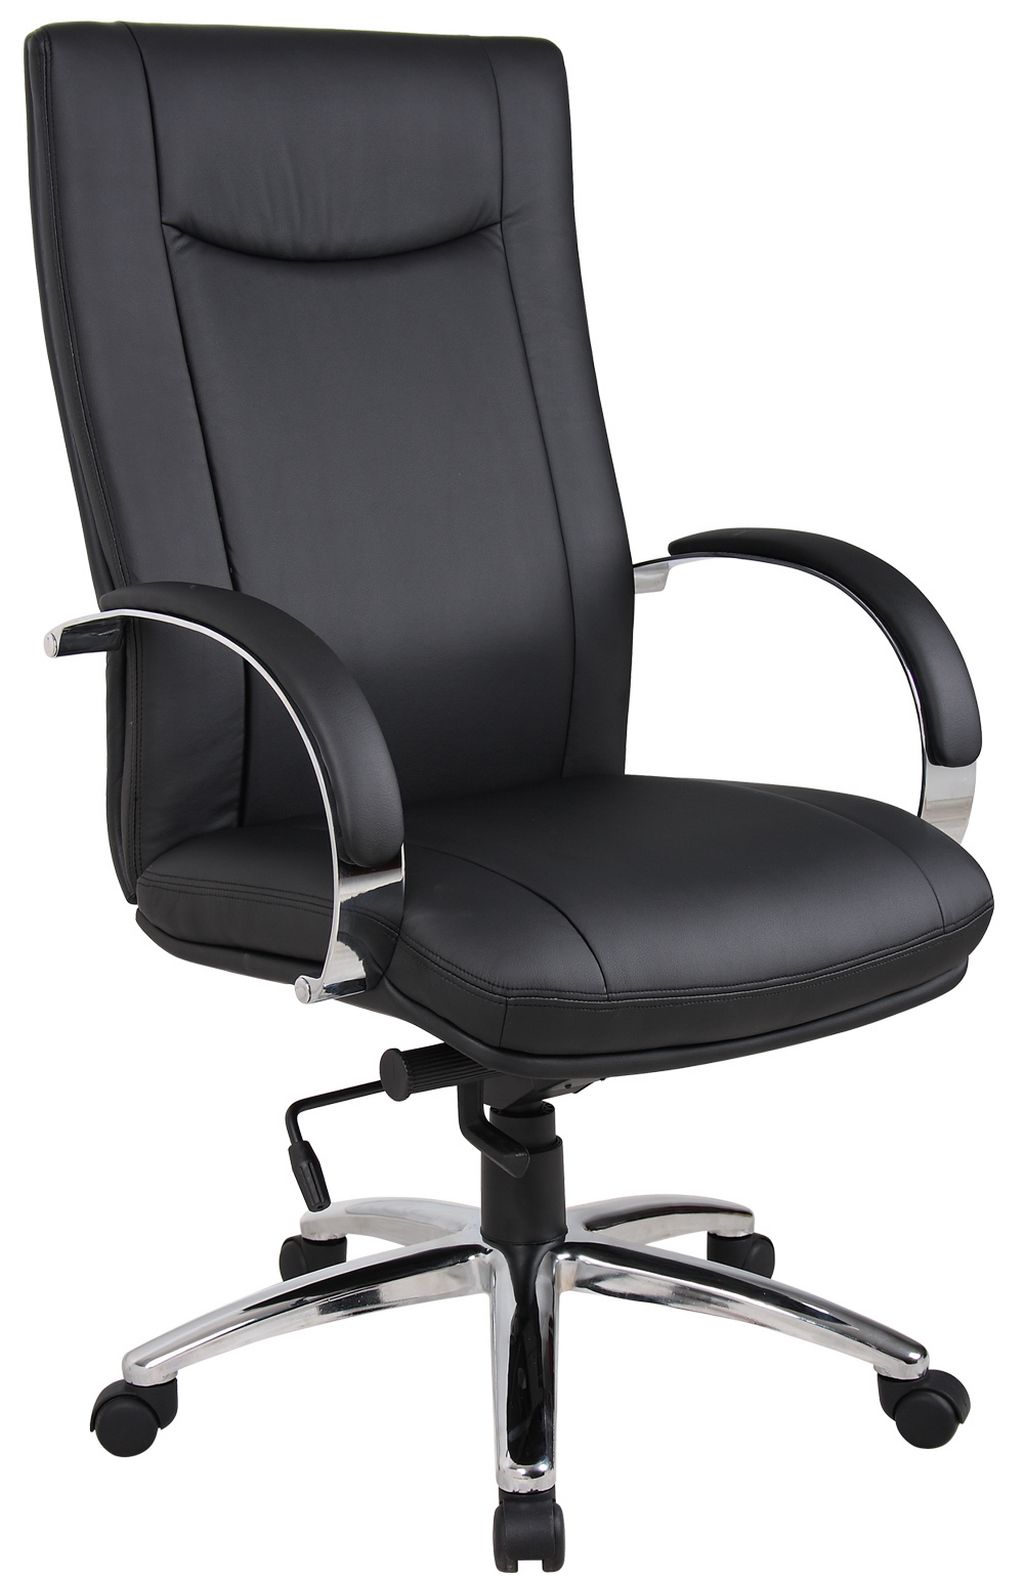 Luxury office chair